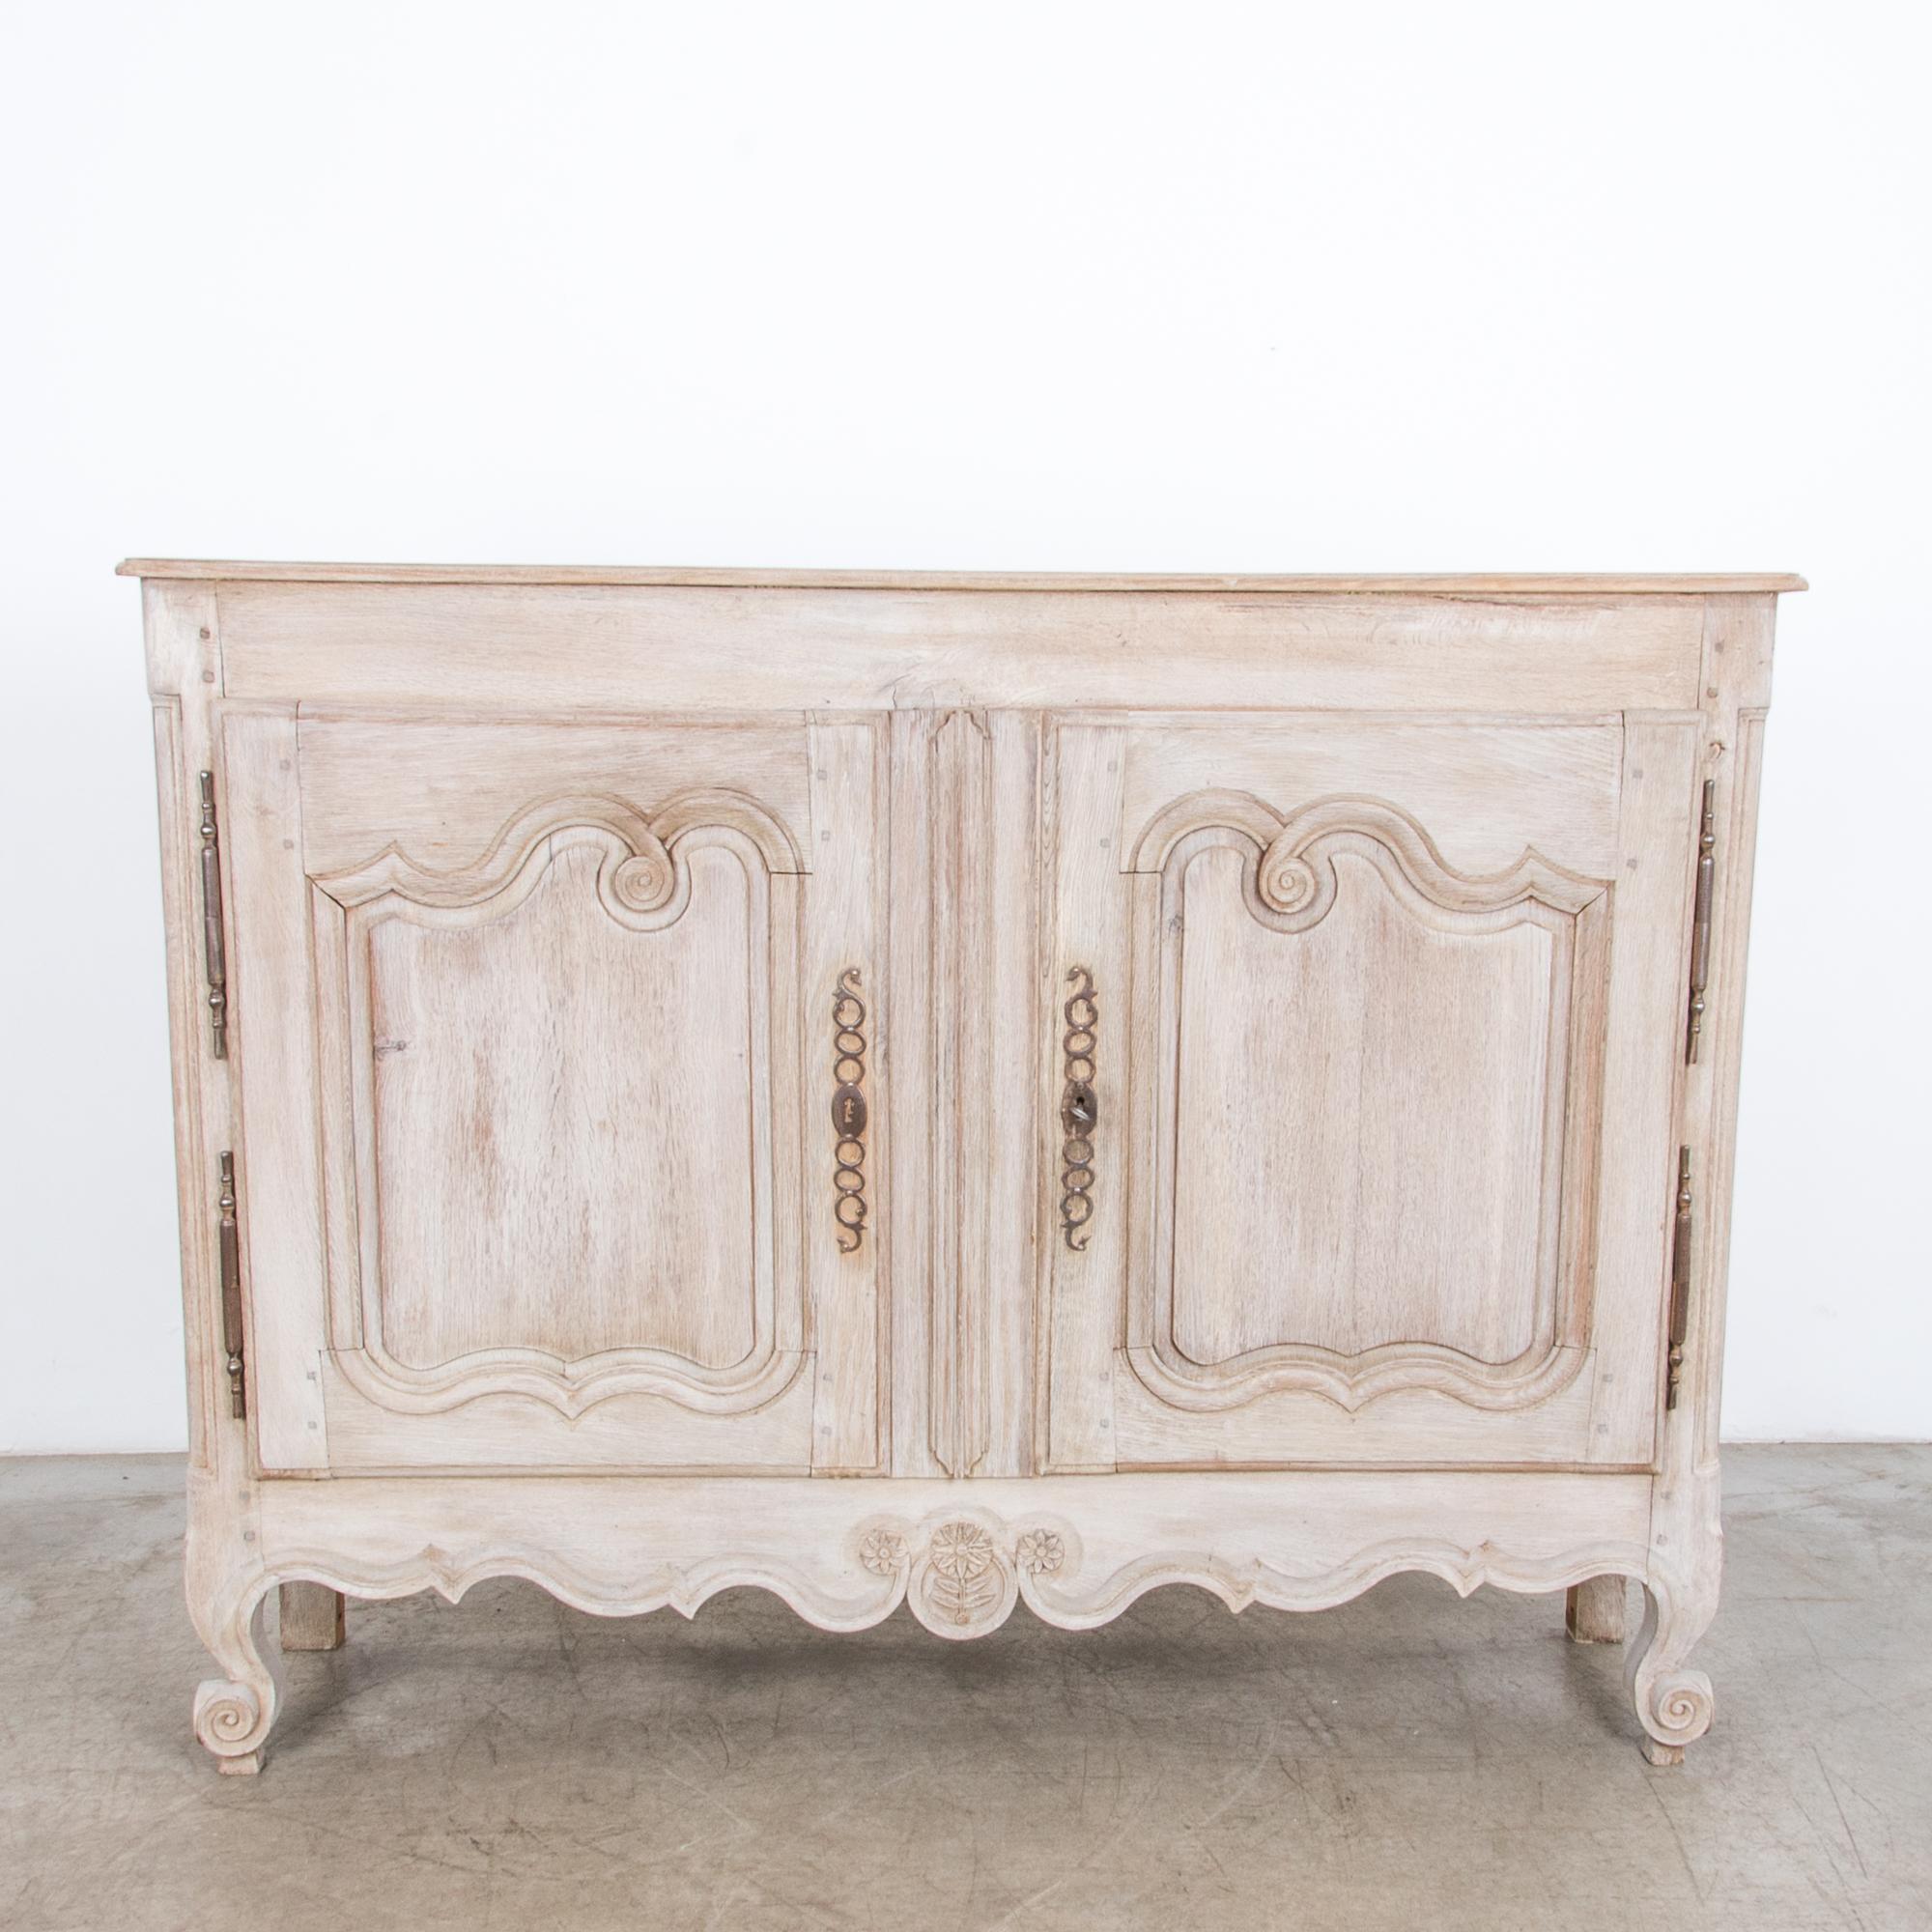 A two-door cabinet from France, circa 1860. Representing the casual yet refined aesthetic of the French countryside, in a contemporary bright finish, enhancing the natural textured figure of the wood and subtle carved ornament. A testament to the